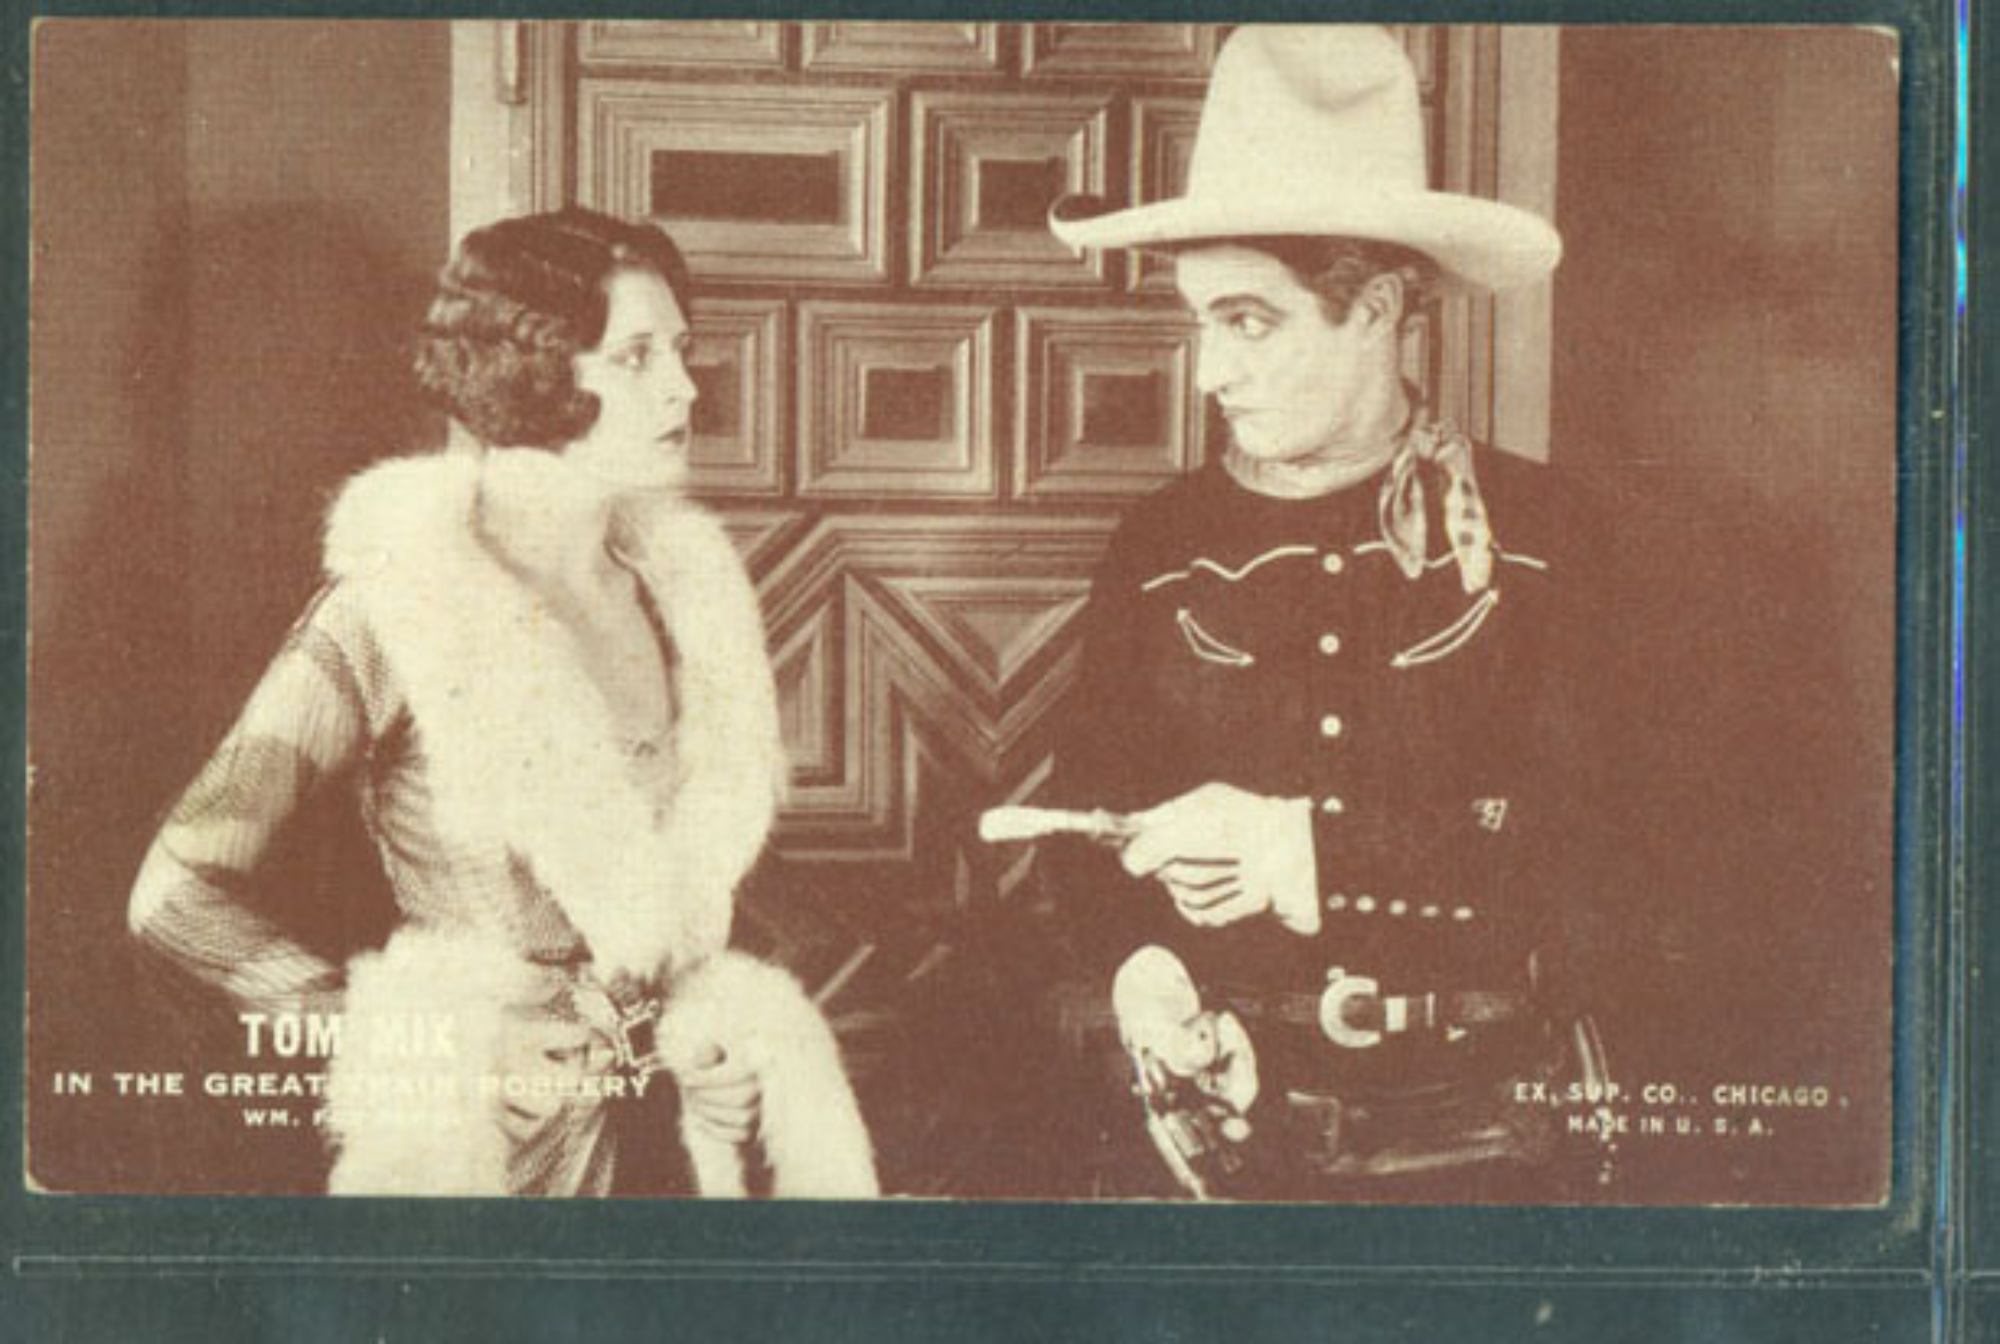 'The Great K & A Train Robbery' Dorothy Dwan as Madge Cullen and Tom Mix as Tom Gordon looking at each other in a sepia image